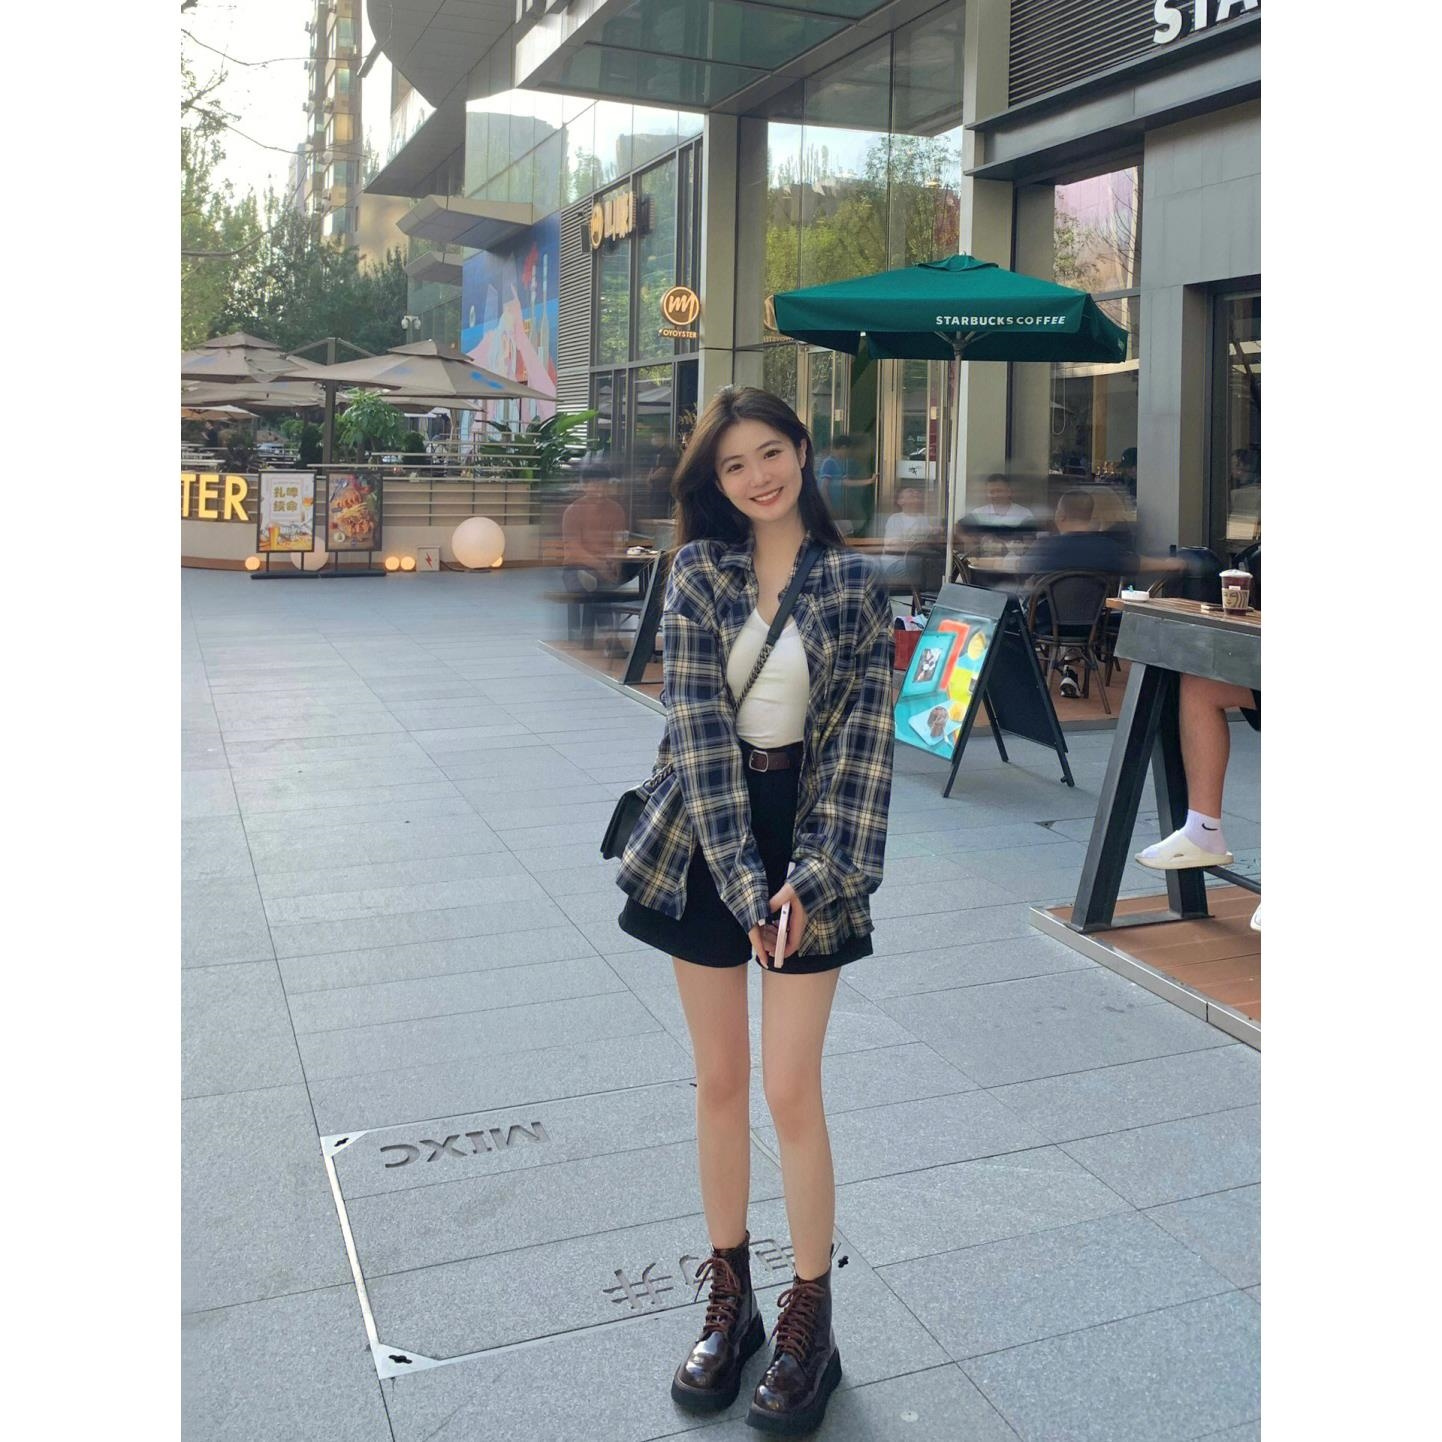 Power style wear plaid shirt women lazy style retro loose shirt cardigan jacket long-sleeved top spring and autumn